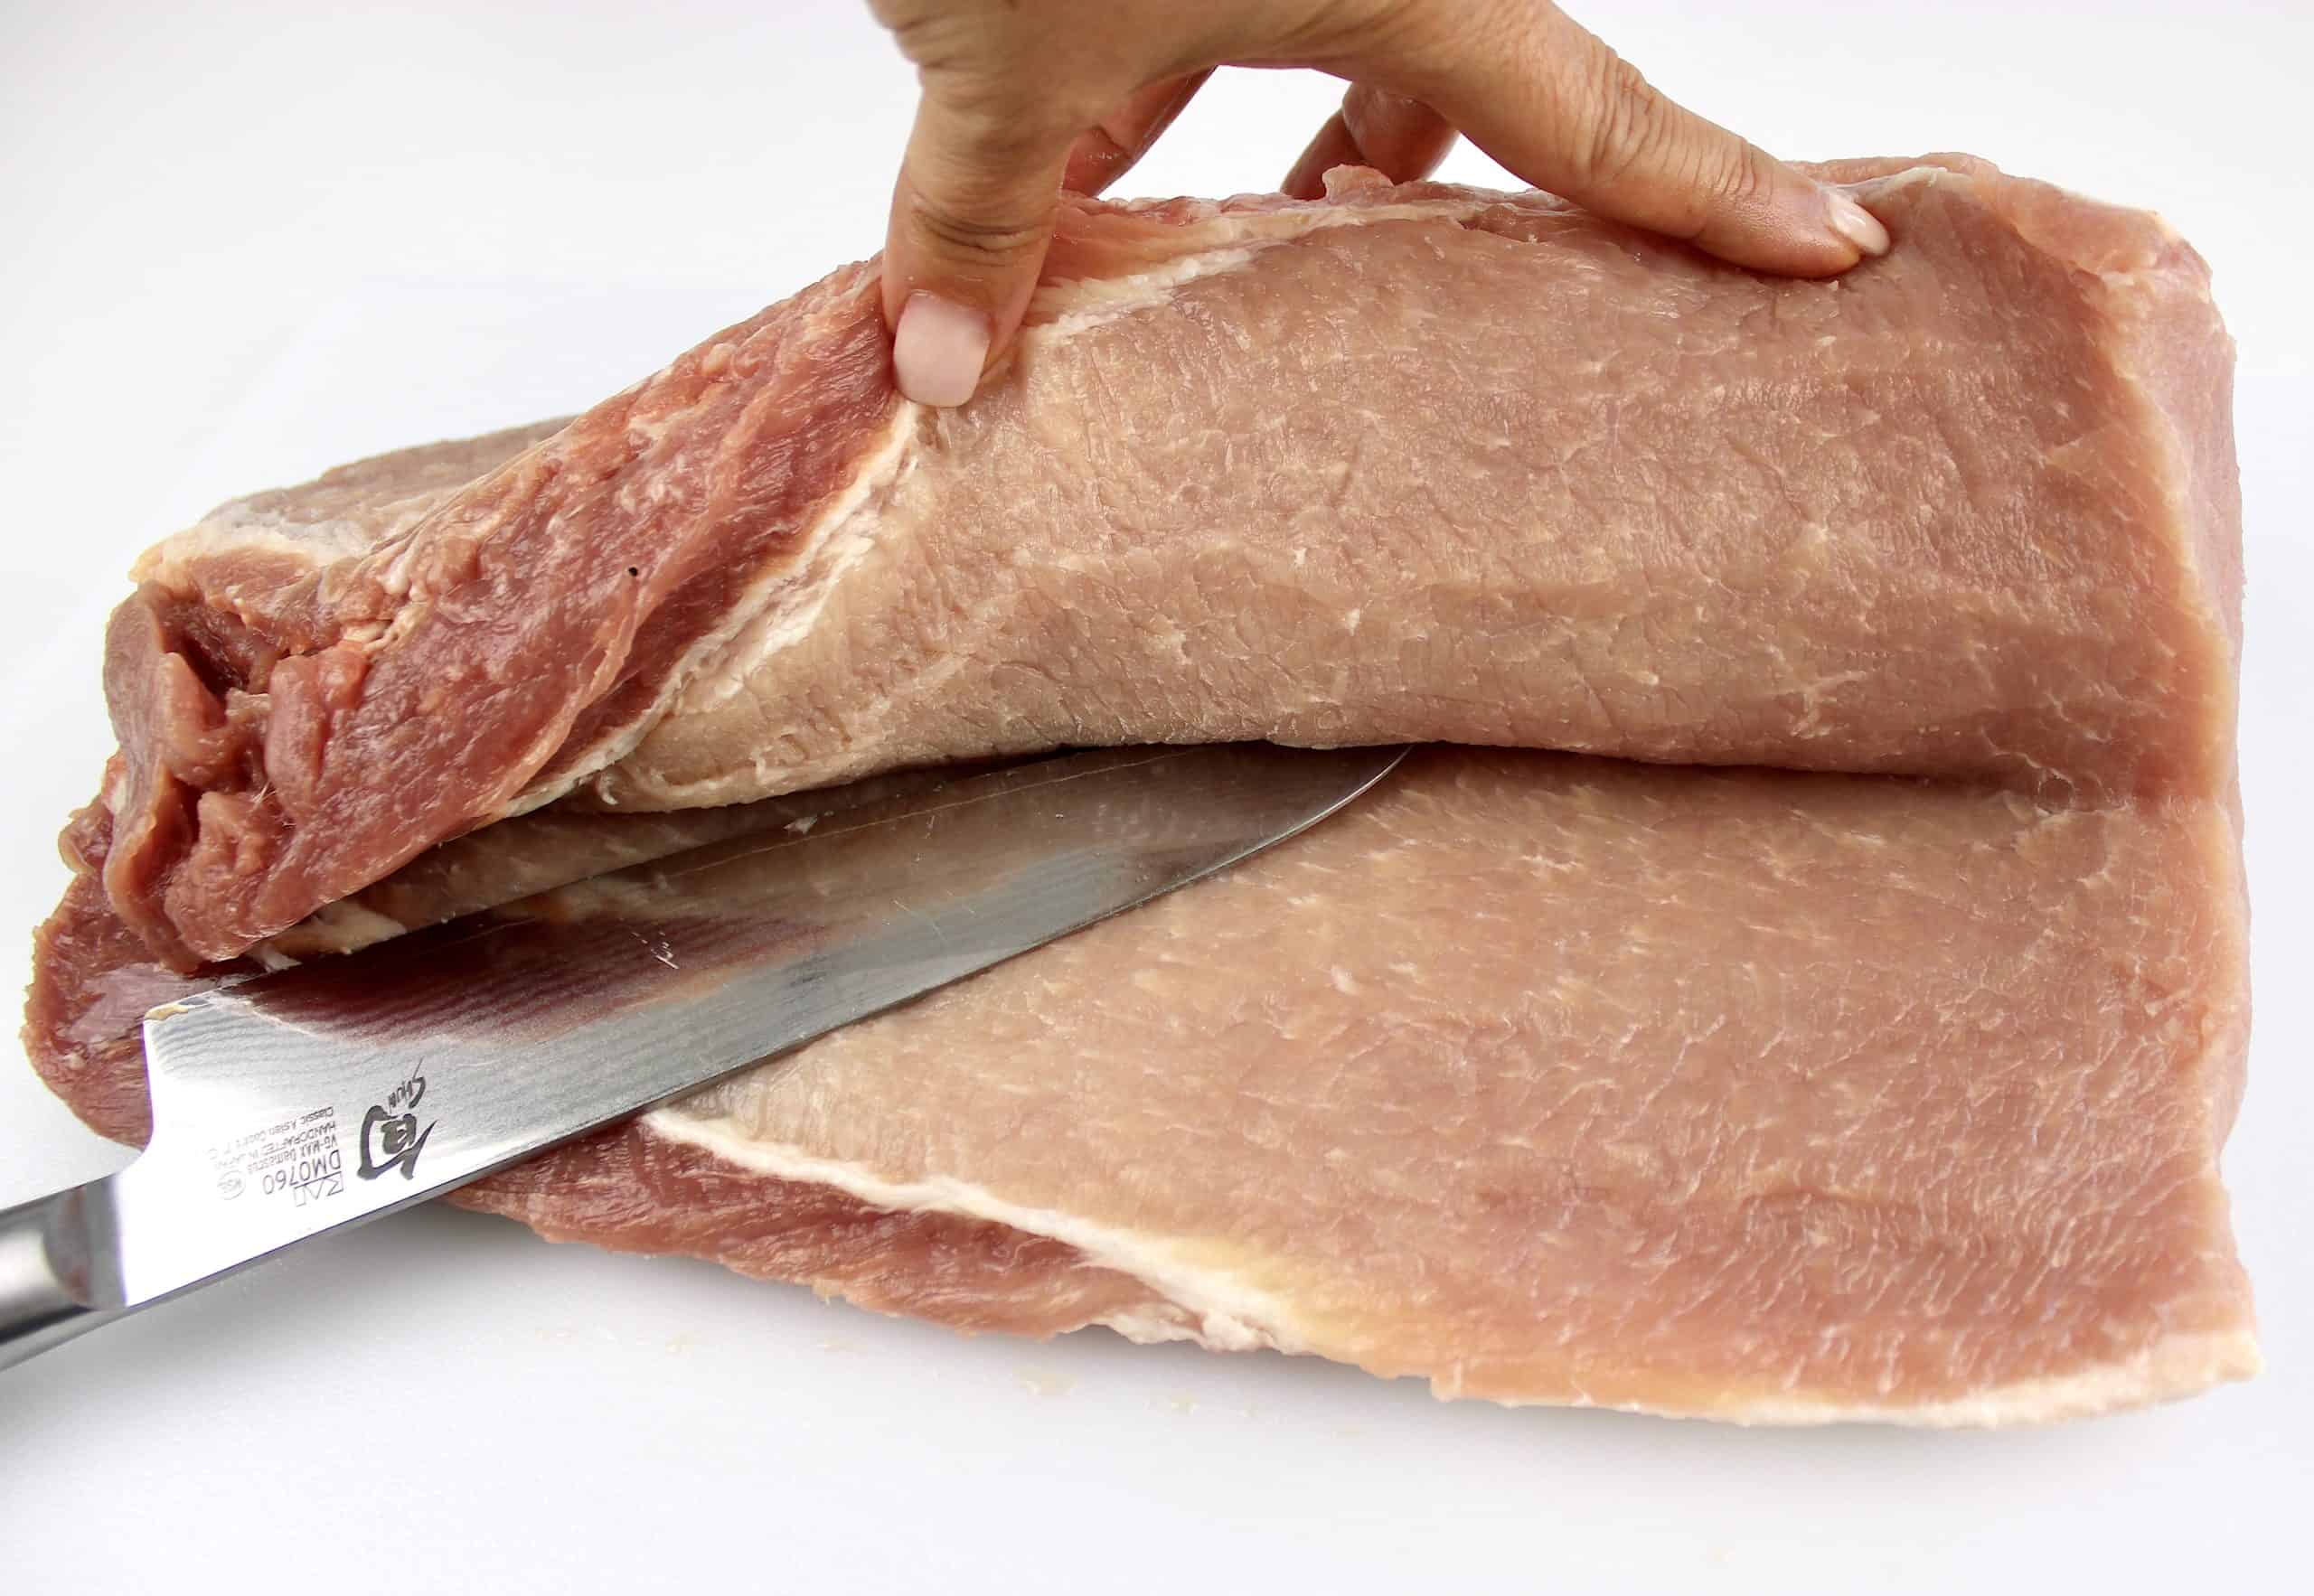 slicing pork loin open with knife